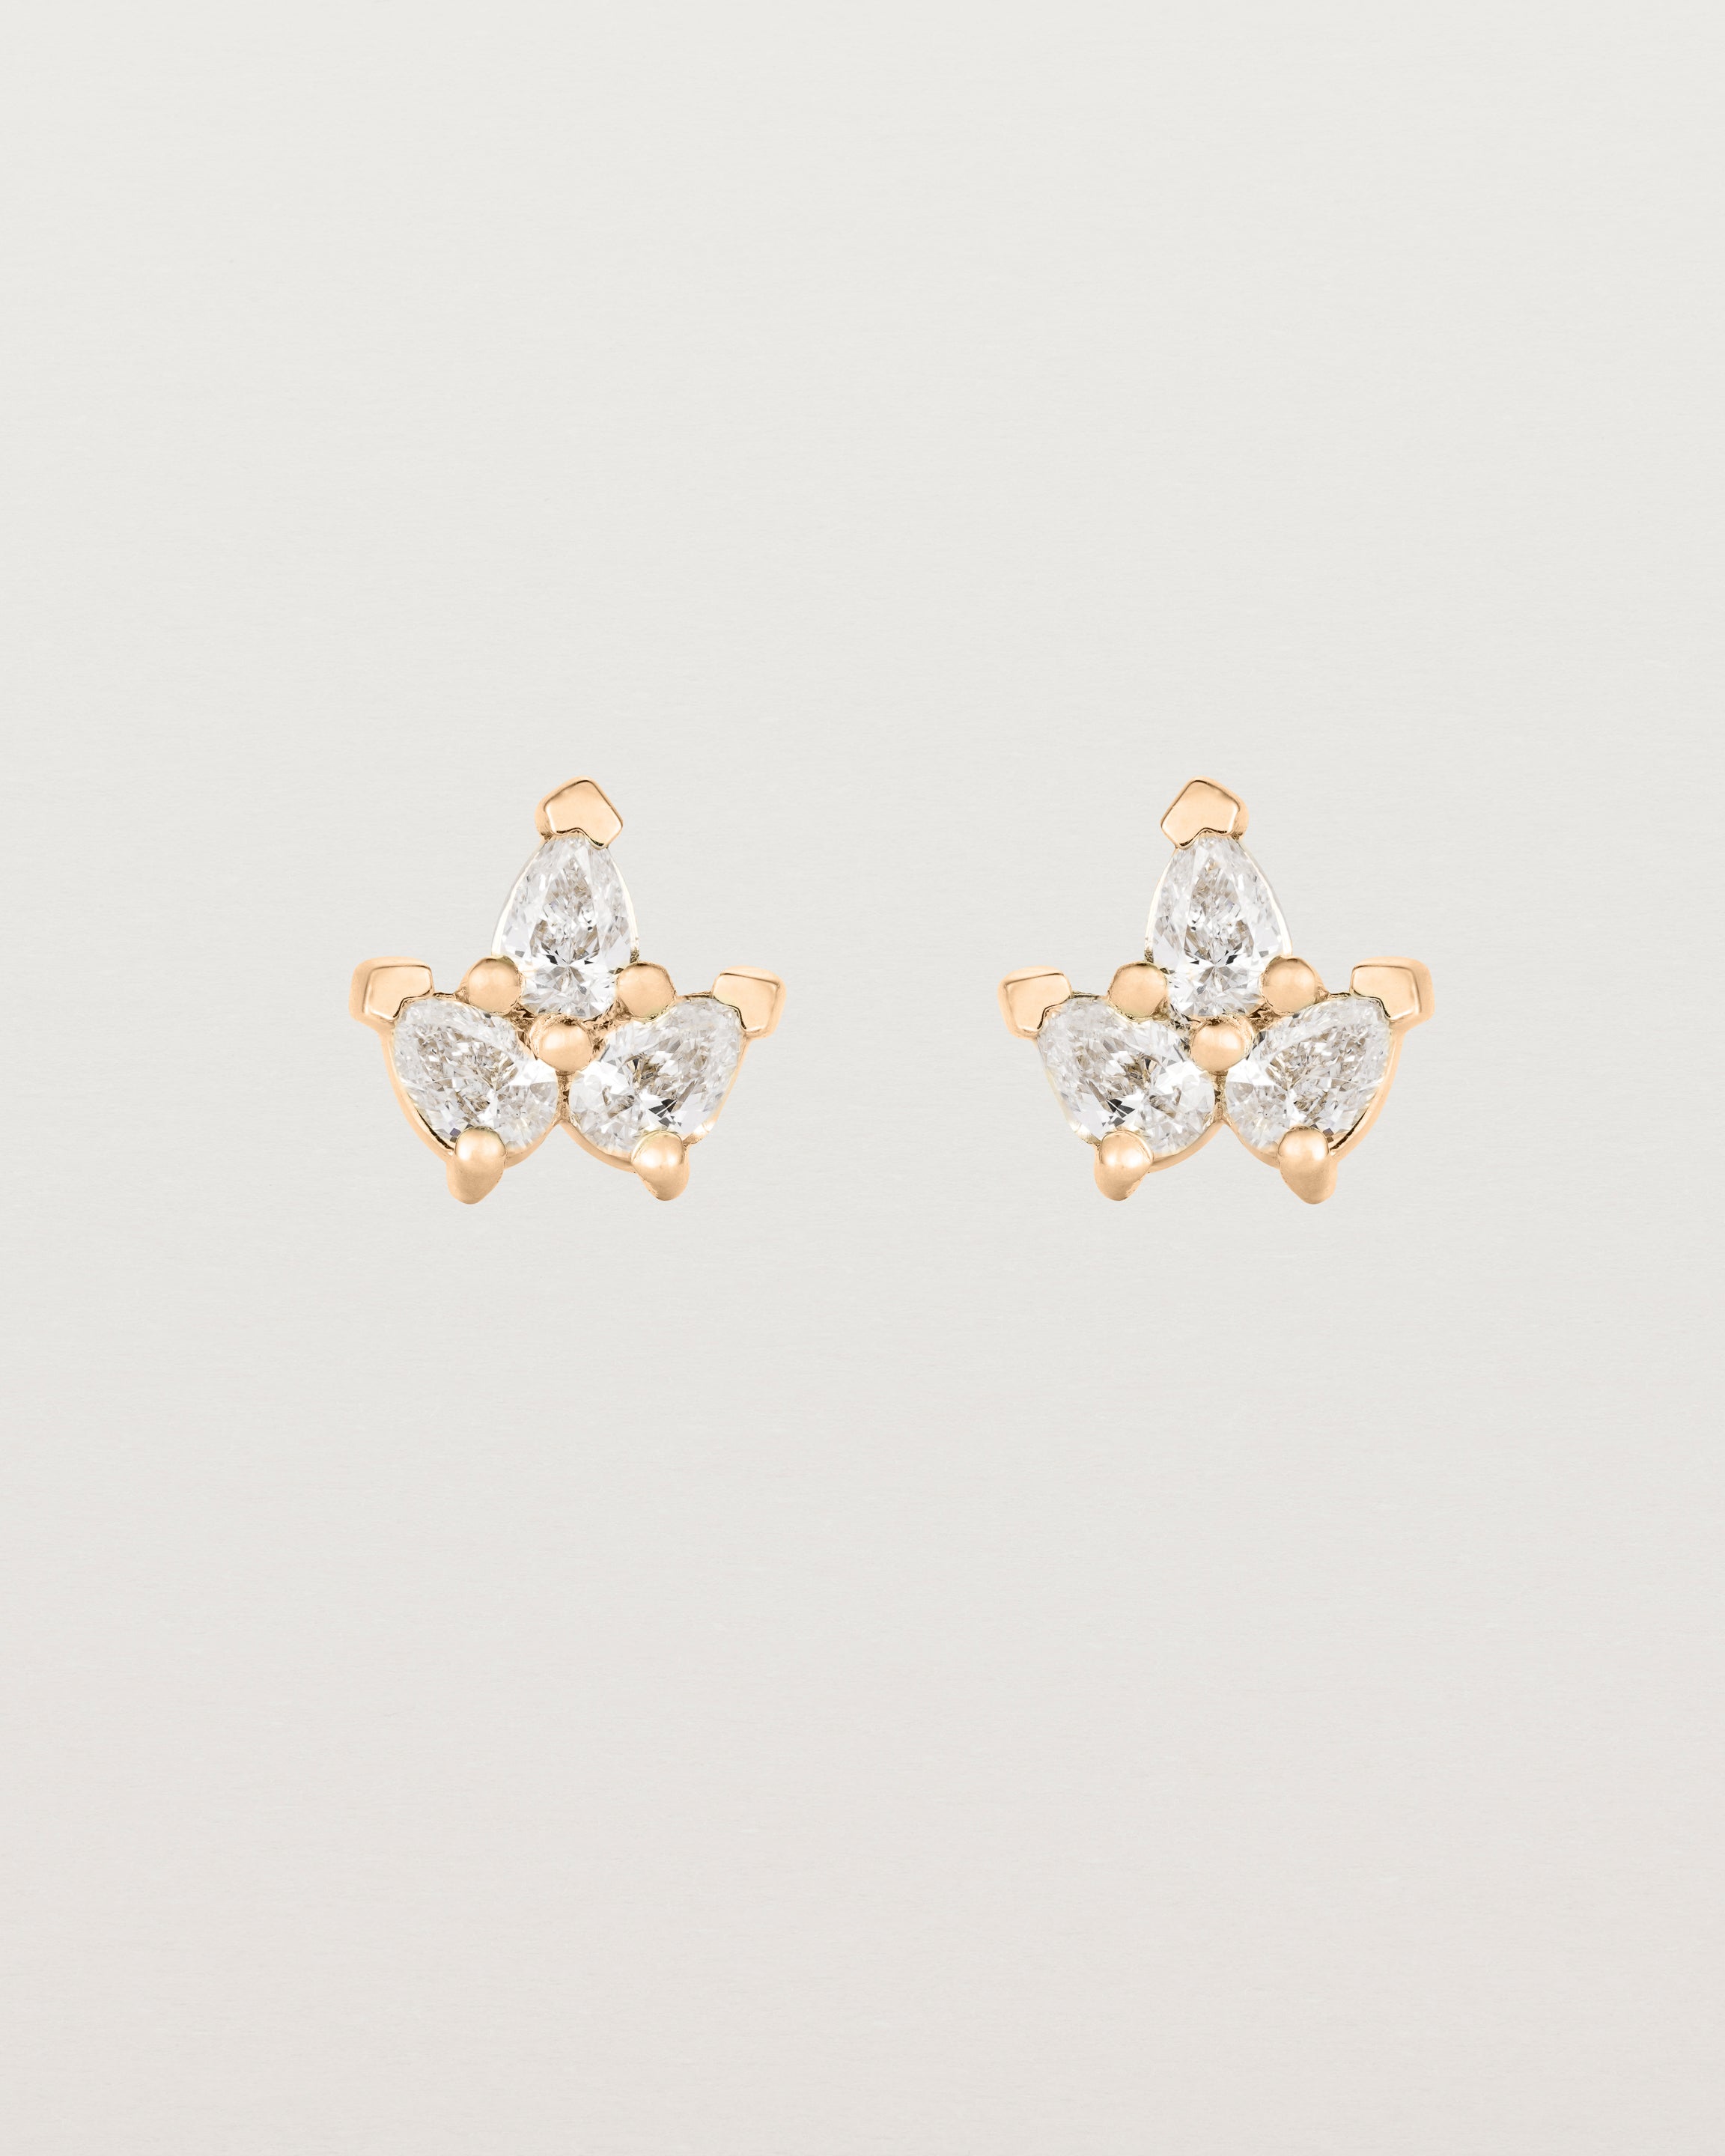 A pair of rose gold studs featuring three pear shaped diamonds